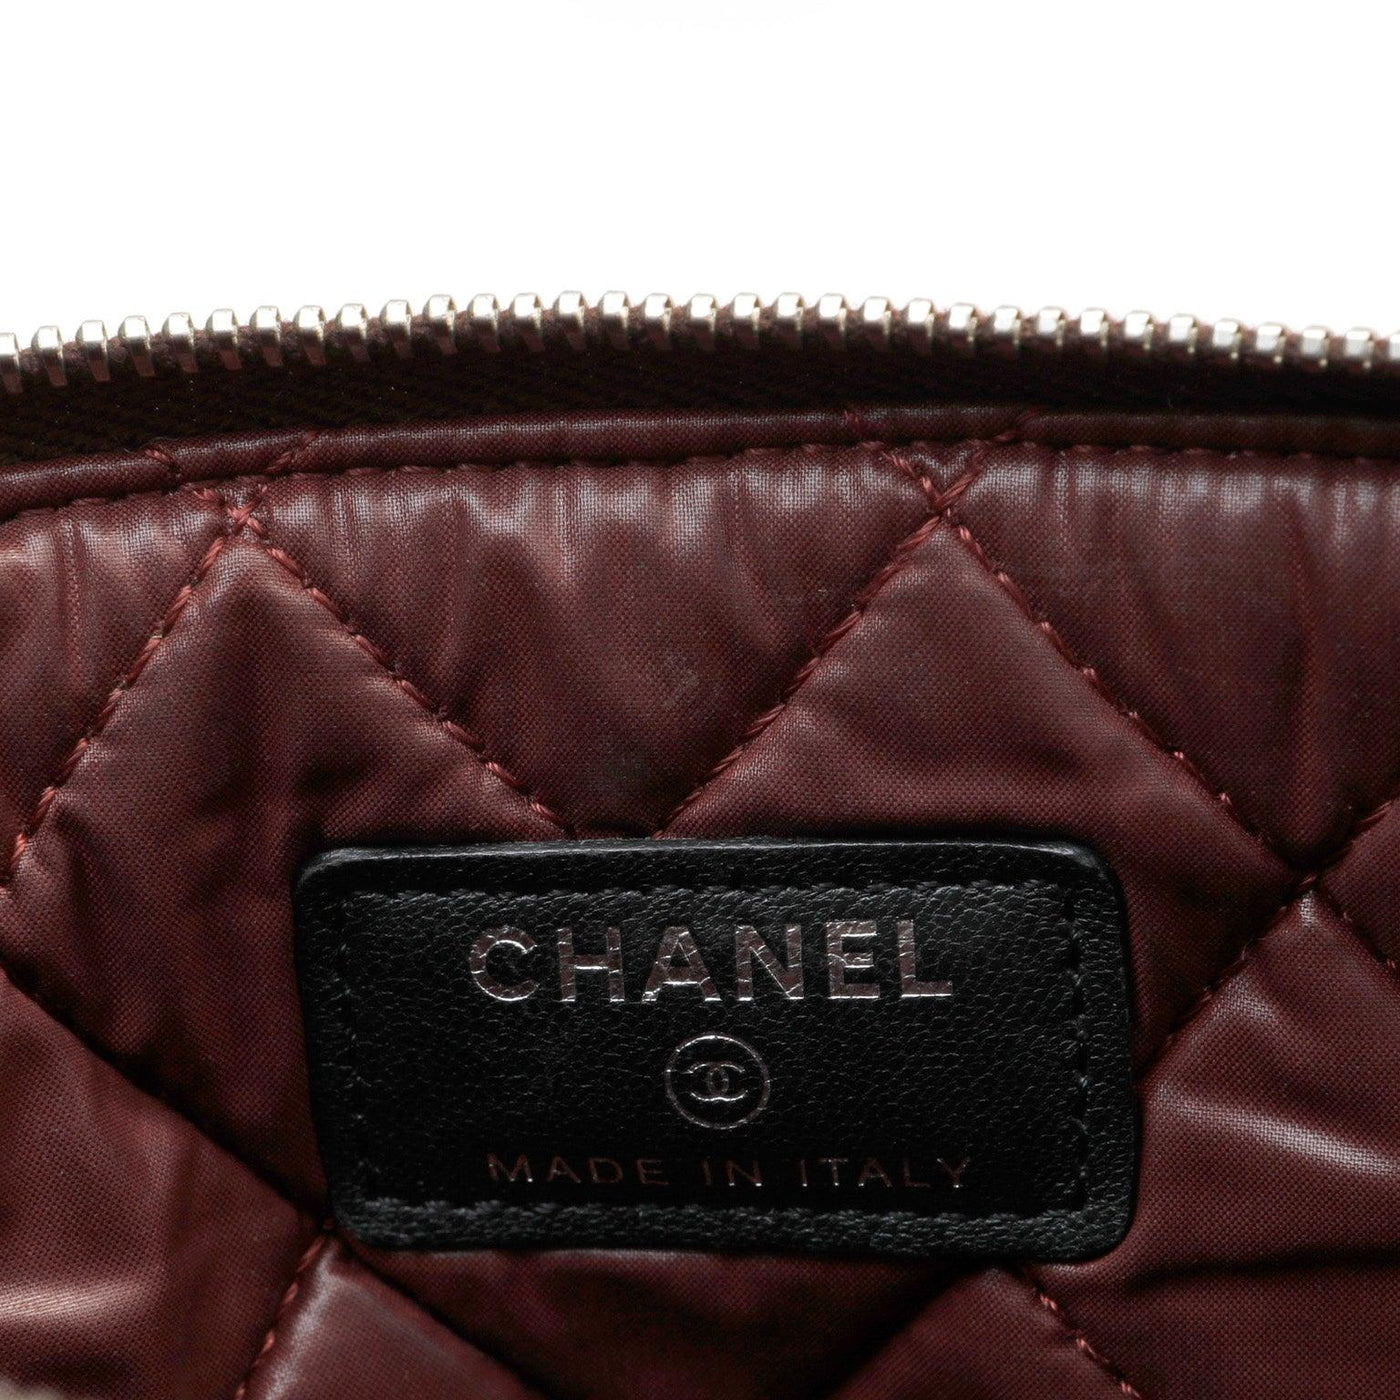 Chanel Small Black Quilted Lambskin Classic O-Case w/ Silver Hardware - Only Authentics